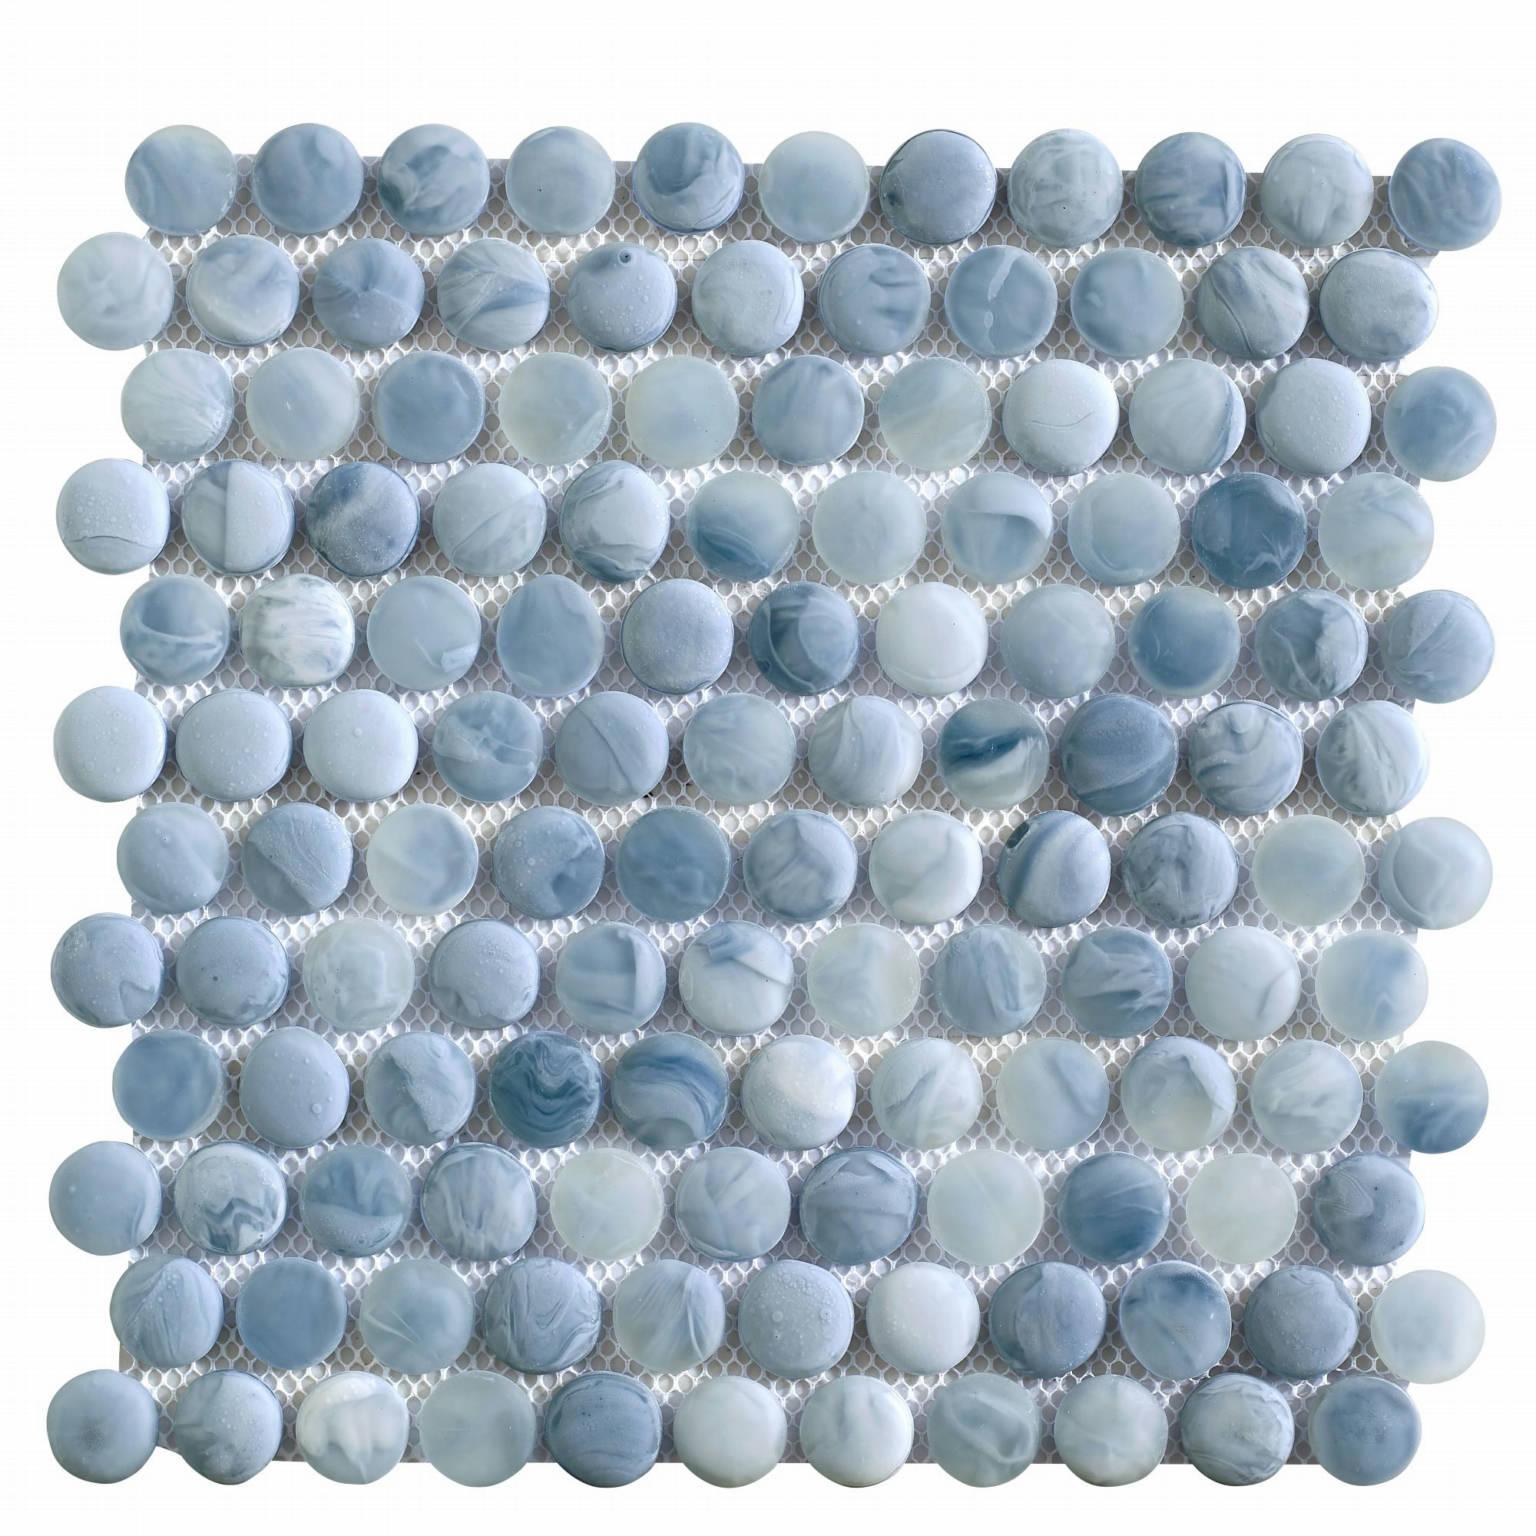 Seine | Stones And More | Finest selection of Mosaics, Glass, Tile and Stone